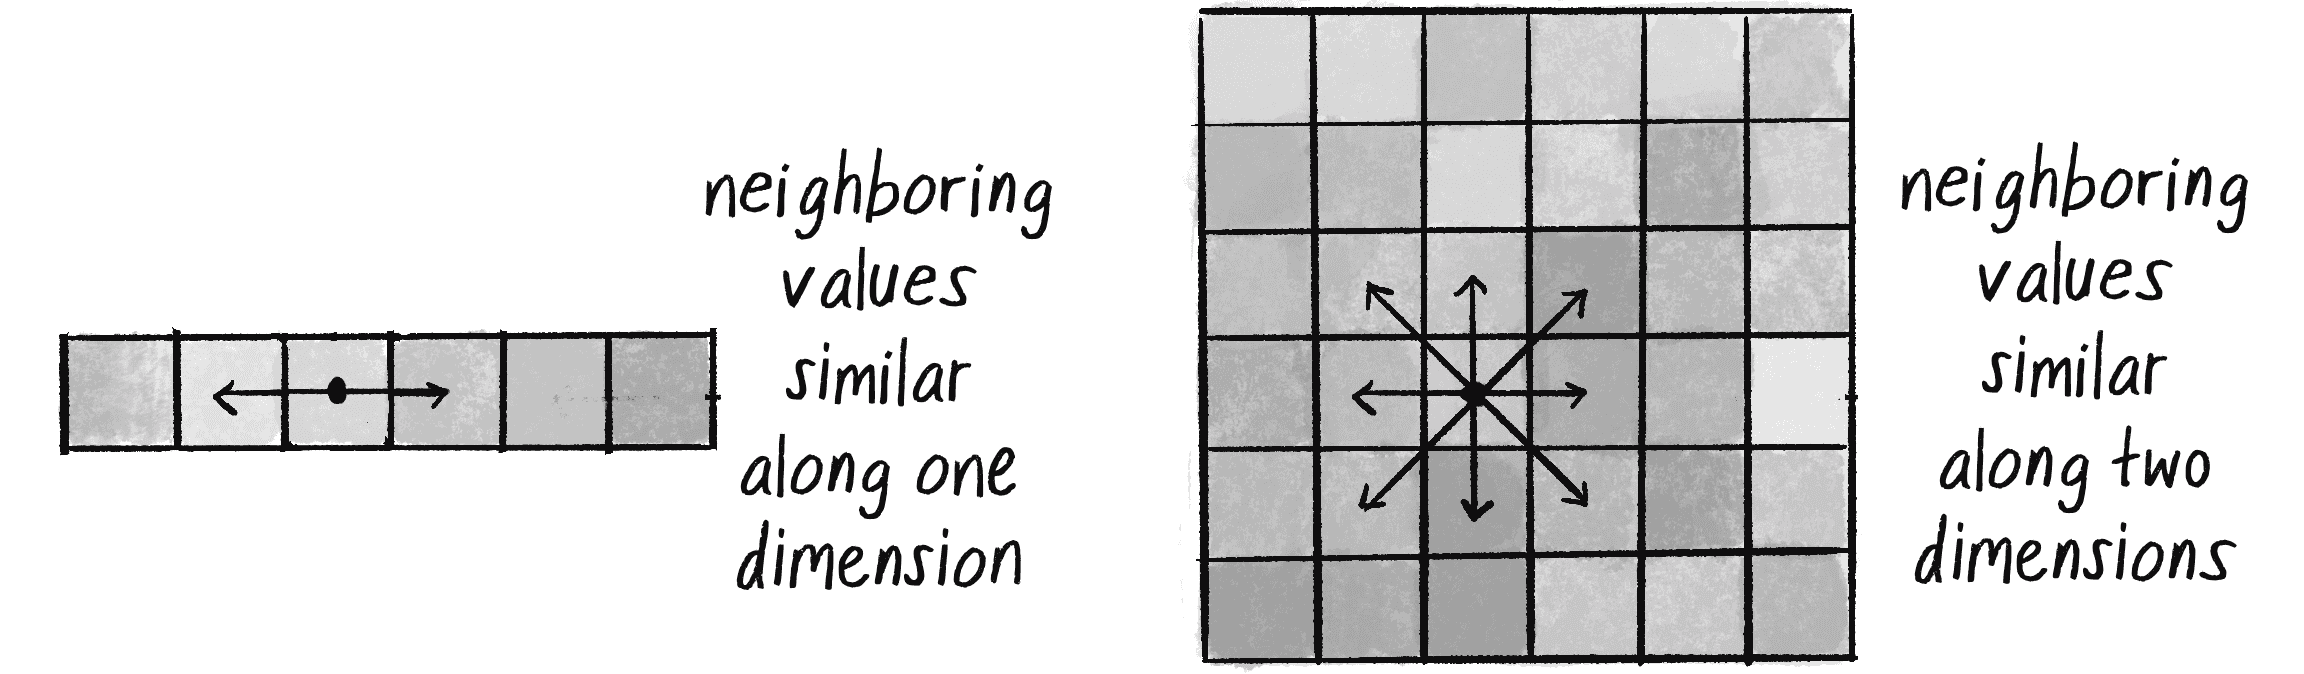 Figure 0.8: Comparing neighboring Perlin noise values in one (left) and two (right) dimensions. The cells are shaded according to their Perlin noise value.